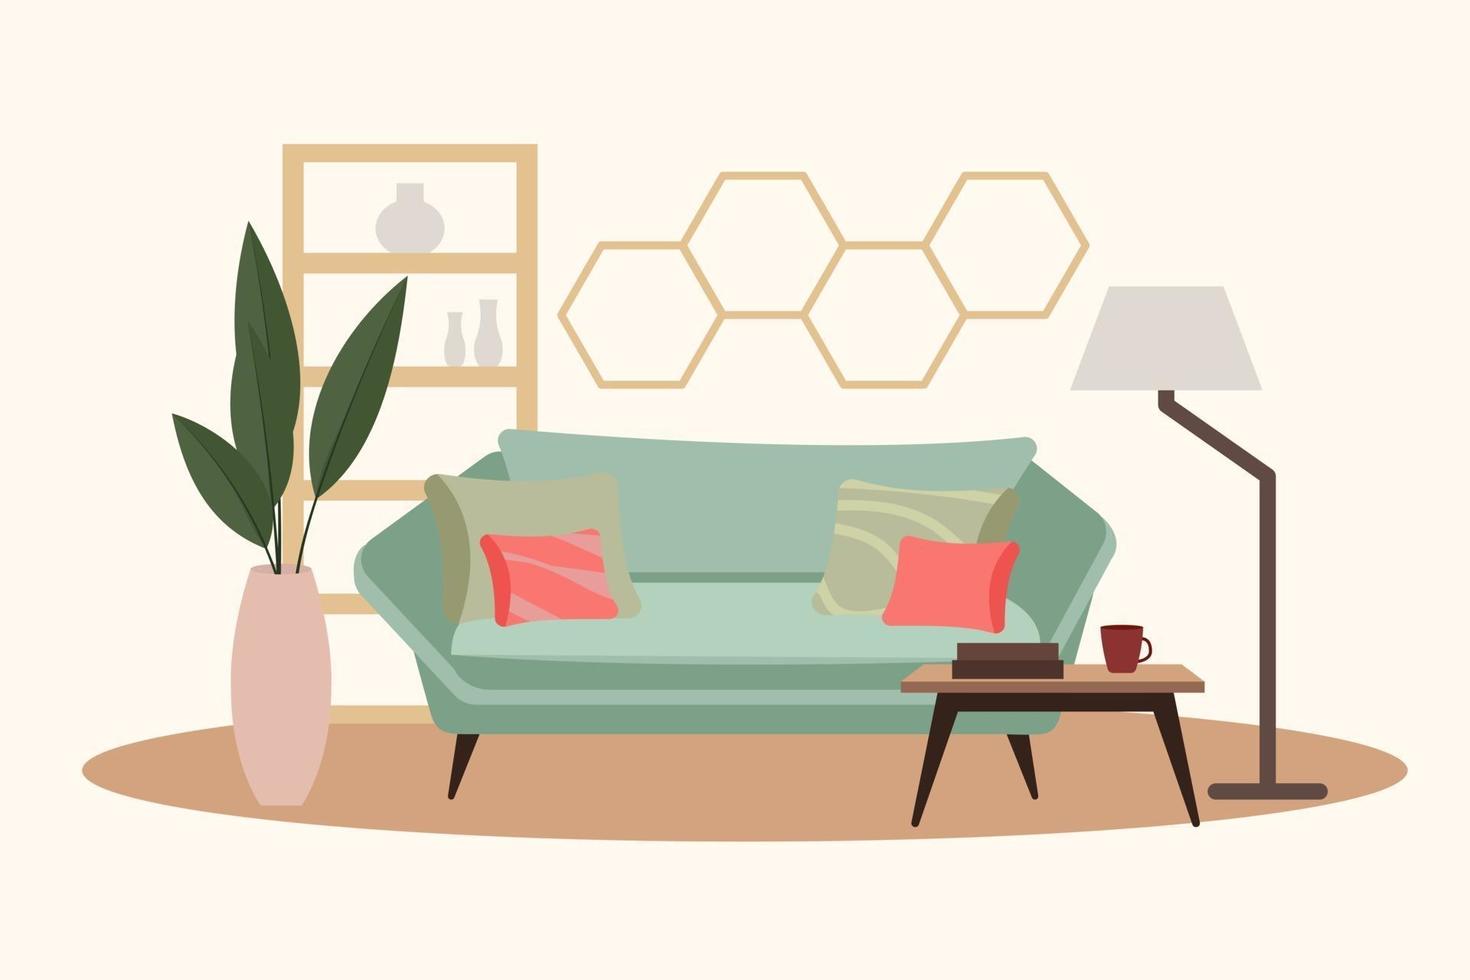 Stylish apartment interiors in Scandinavian style with modern decor vector